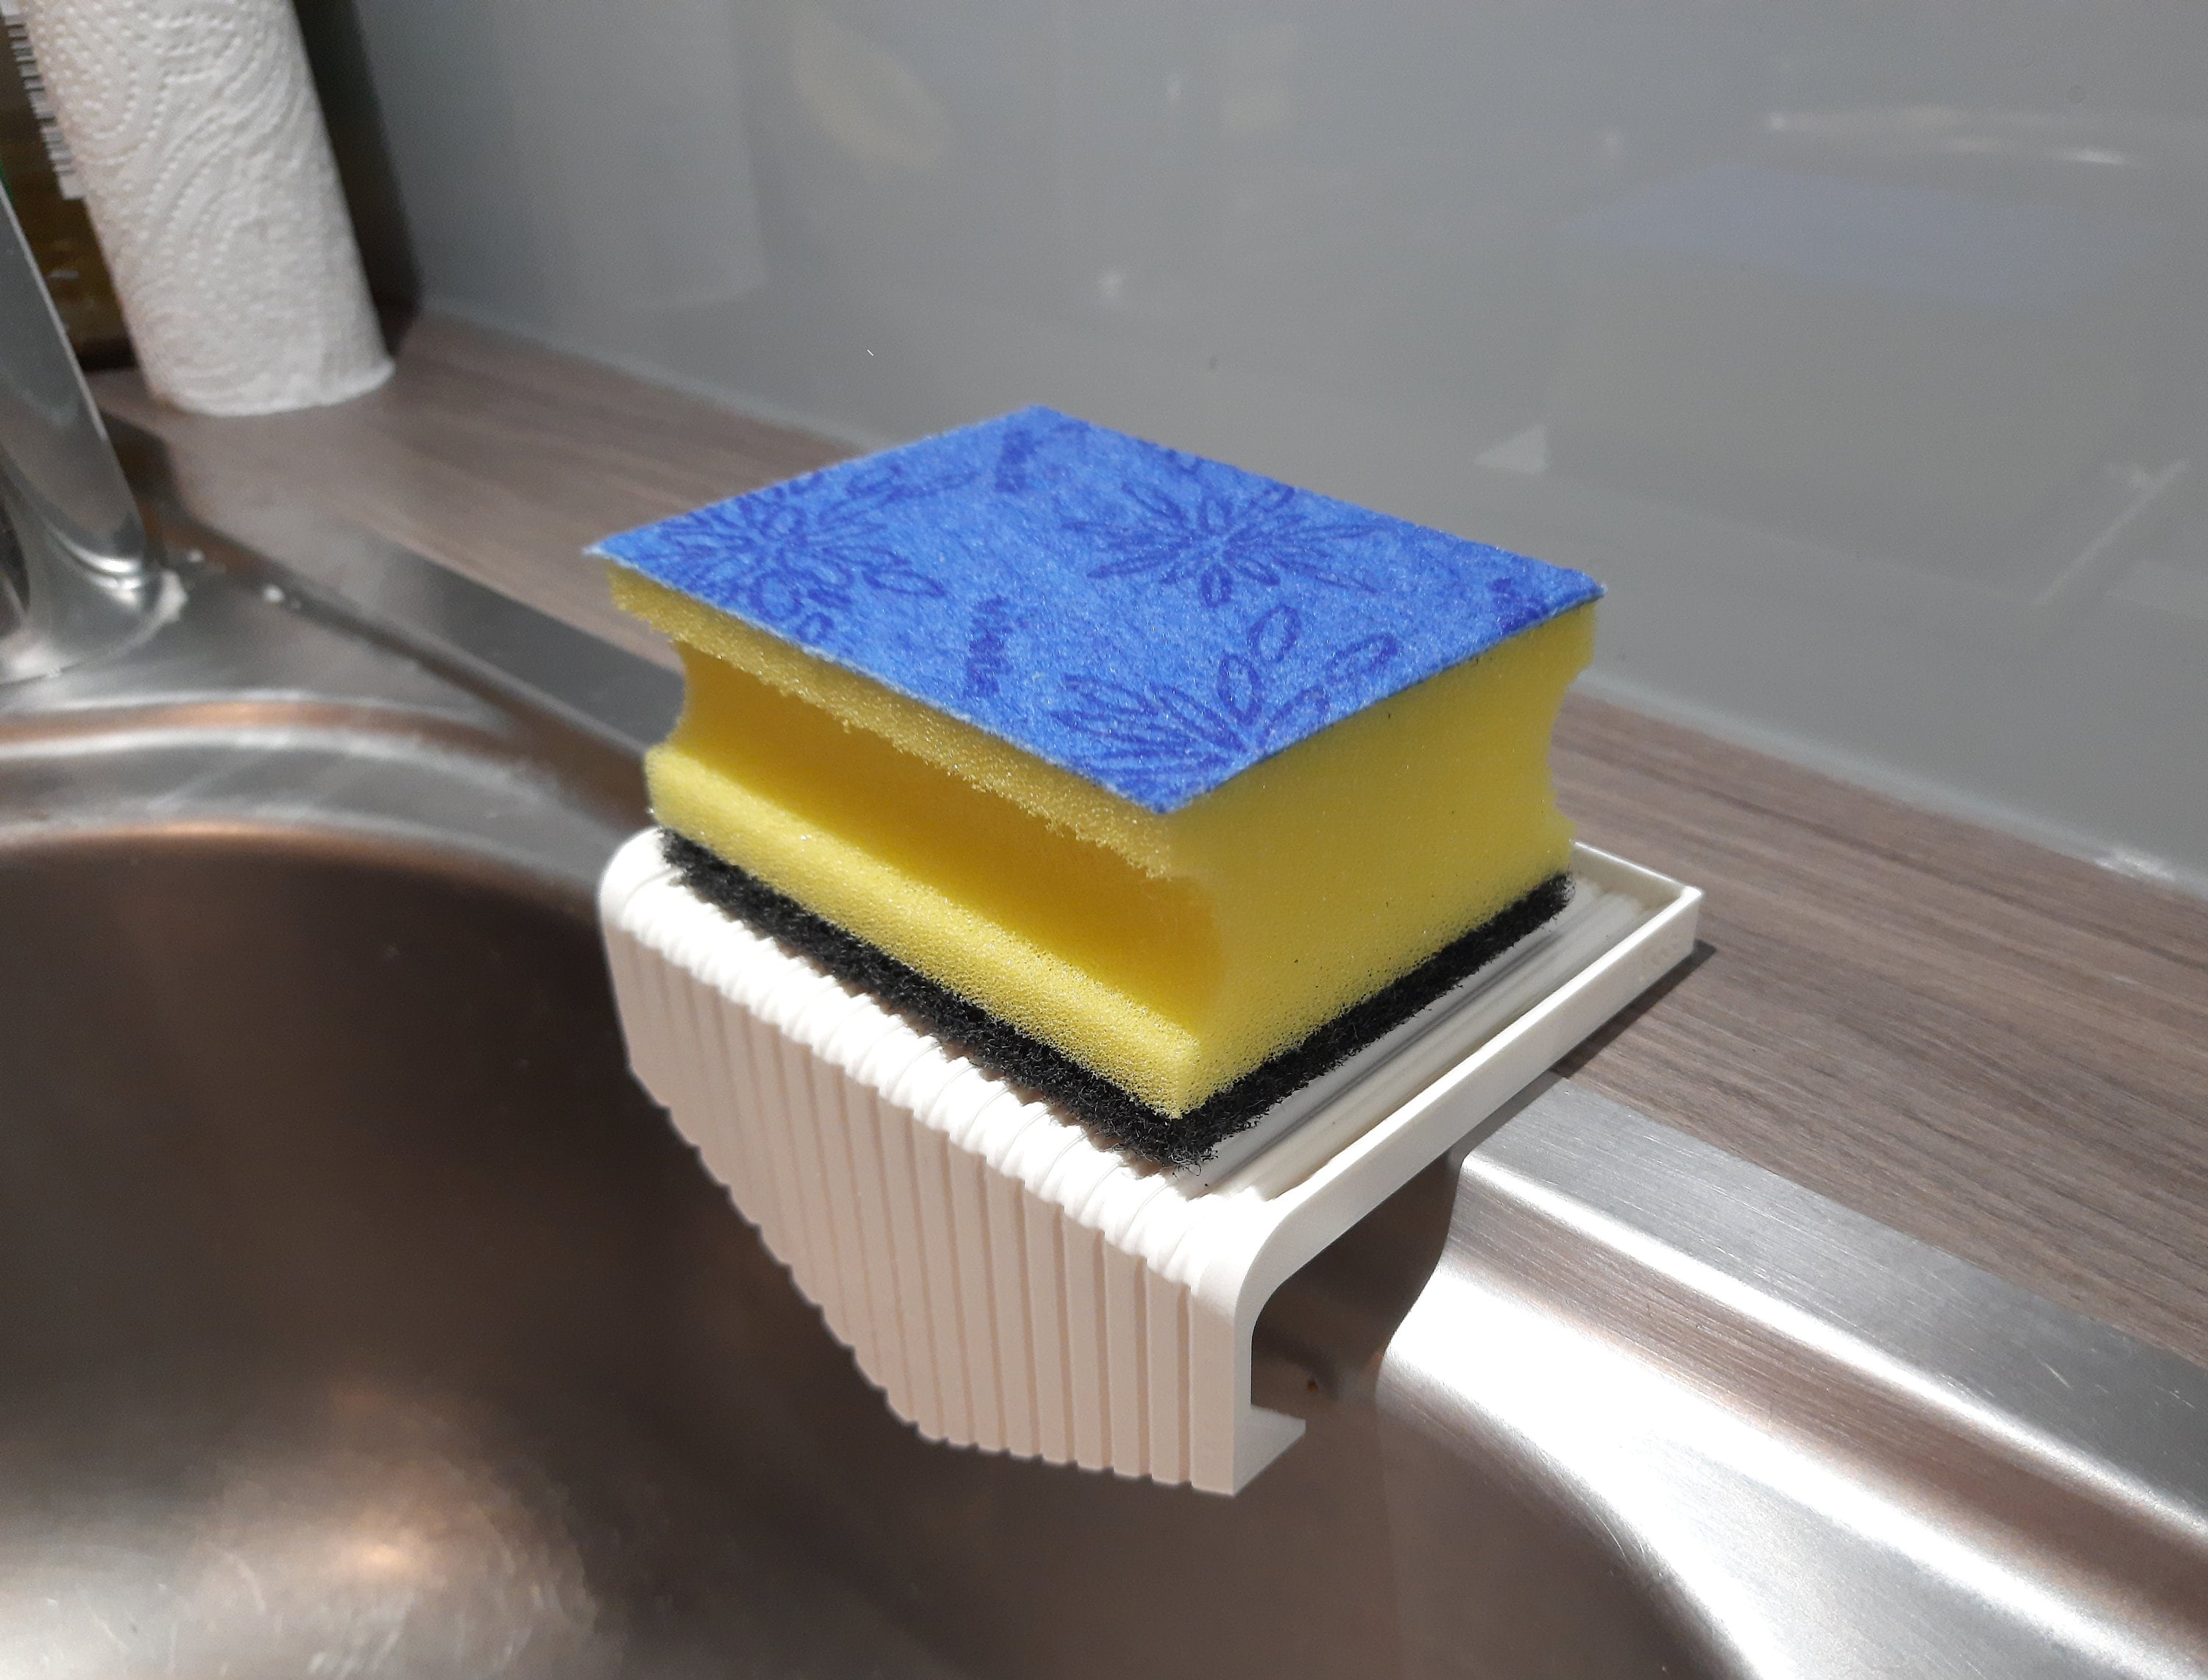 Dish Wand Holder Adjustable Kitchen Dishwand Sink Caddy,Sponge Holder,Brush  Holder,Dish Cloth Holder,Rust Proof Water Proof, No Drilling, No Adhesive,  one-Step Installation 